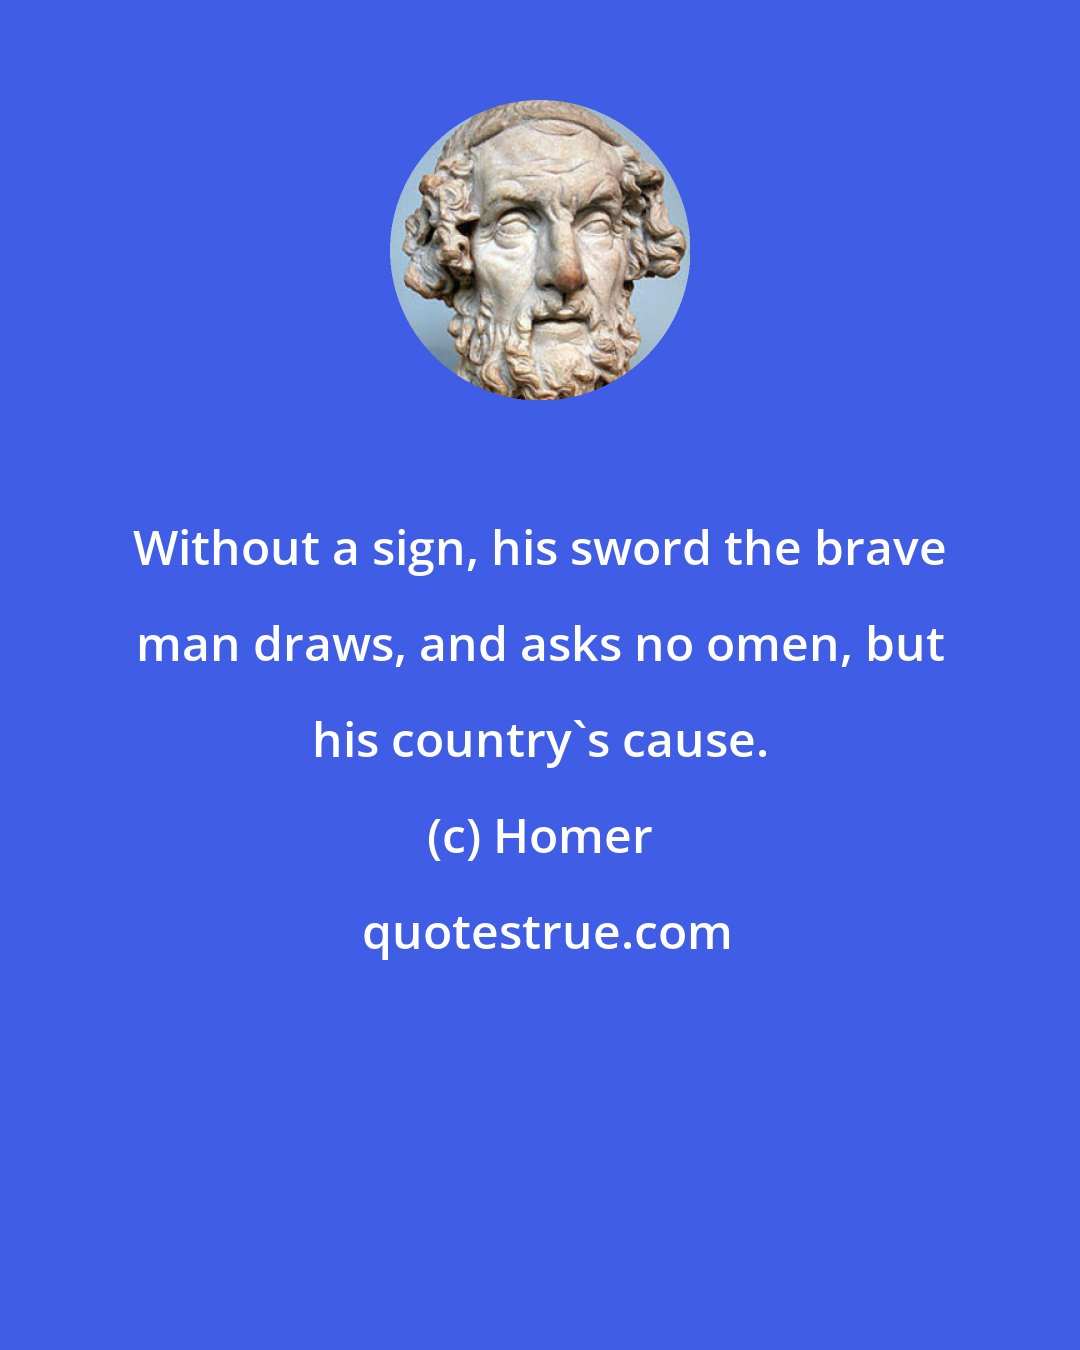 Homer: Without a sign, his sword the brave man draws, and asks no omen, but his country's cause.